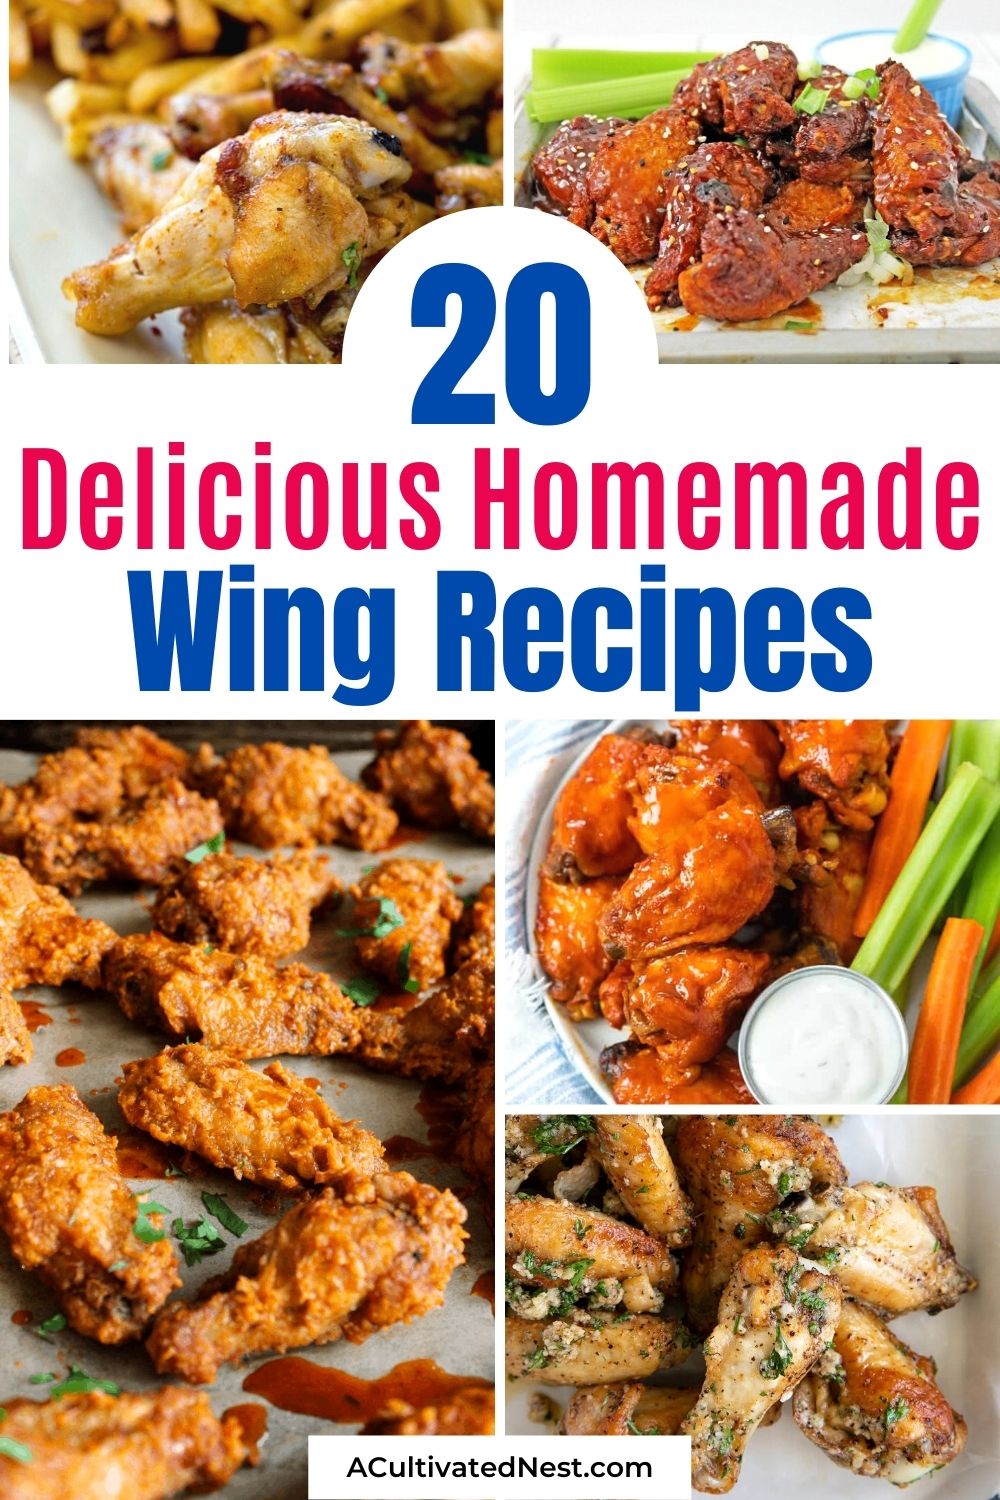 20 Tasty Wing Recipes for Your Next Watch Party